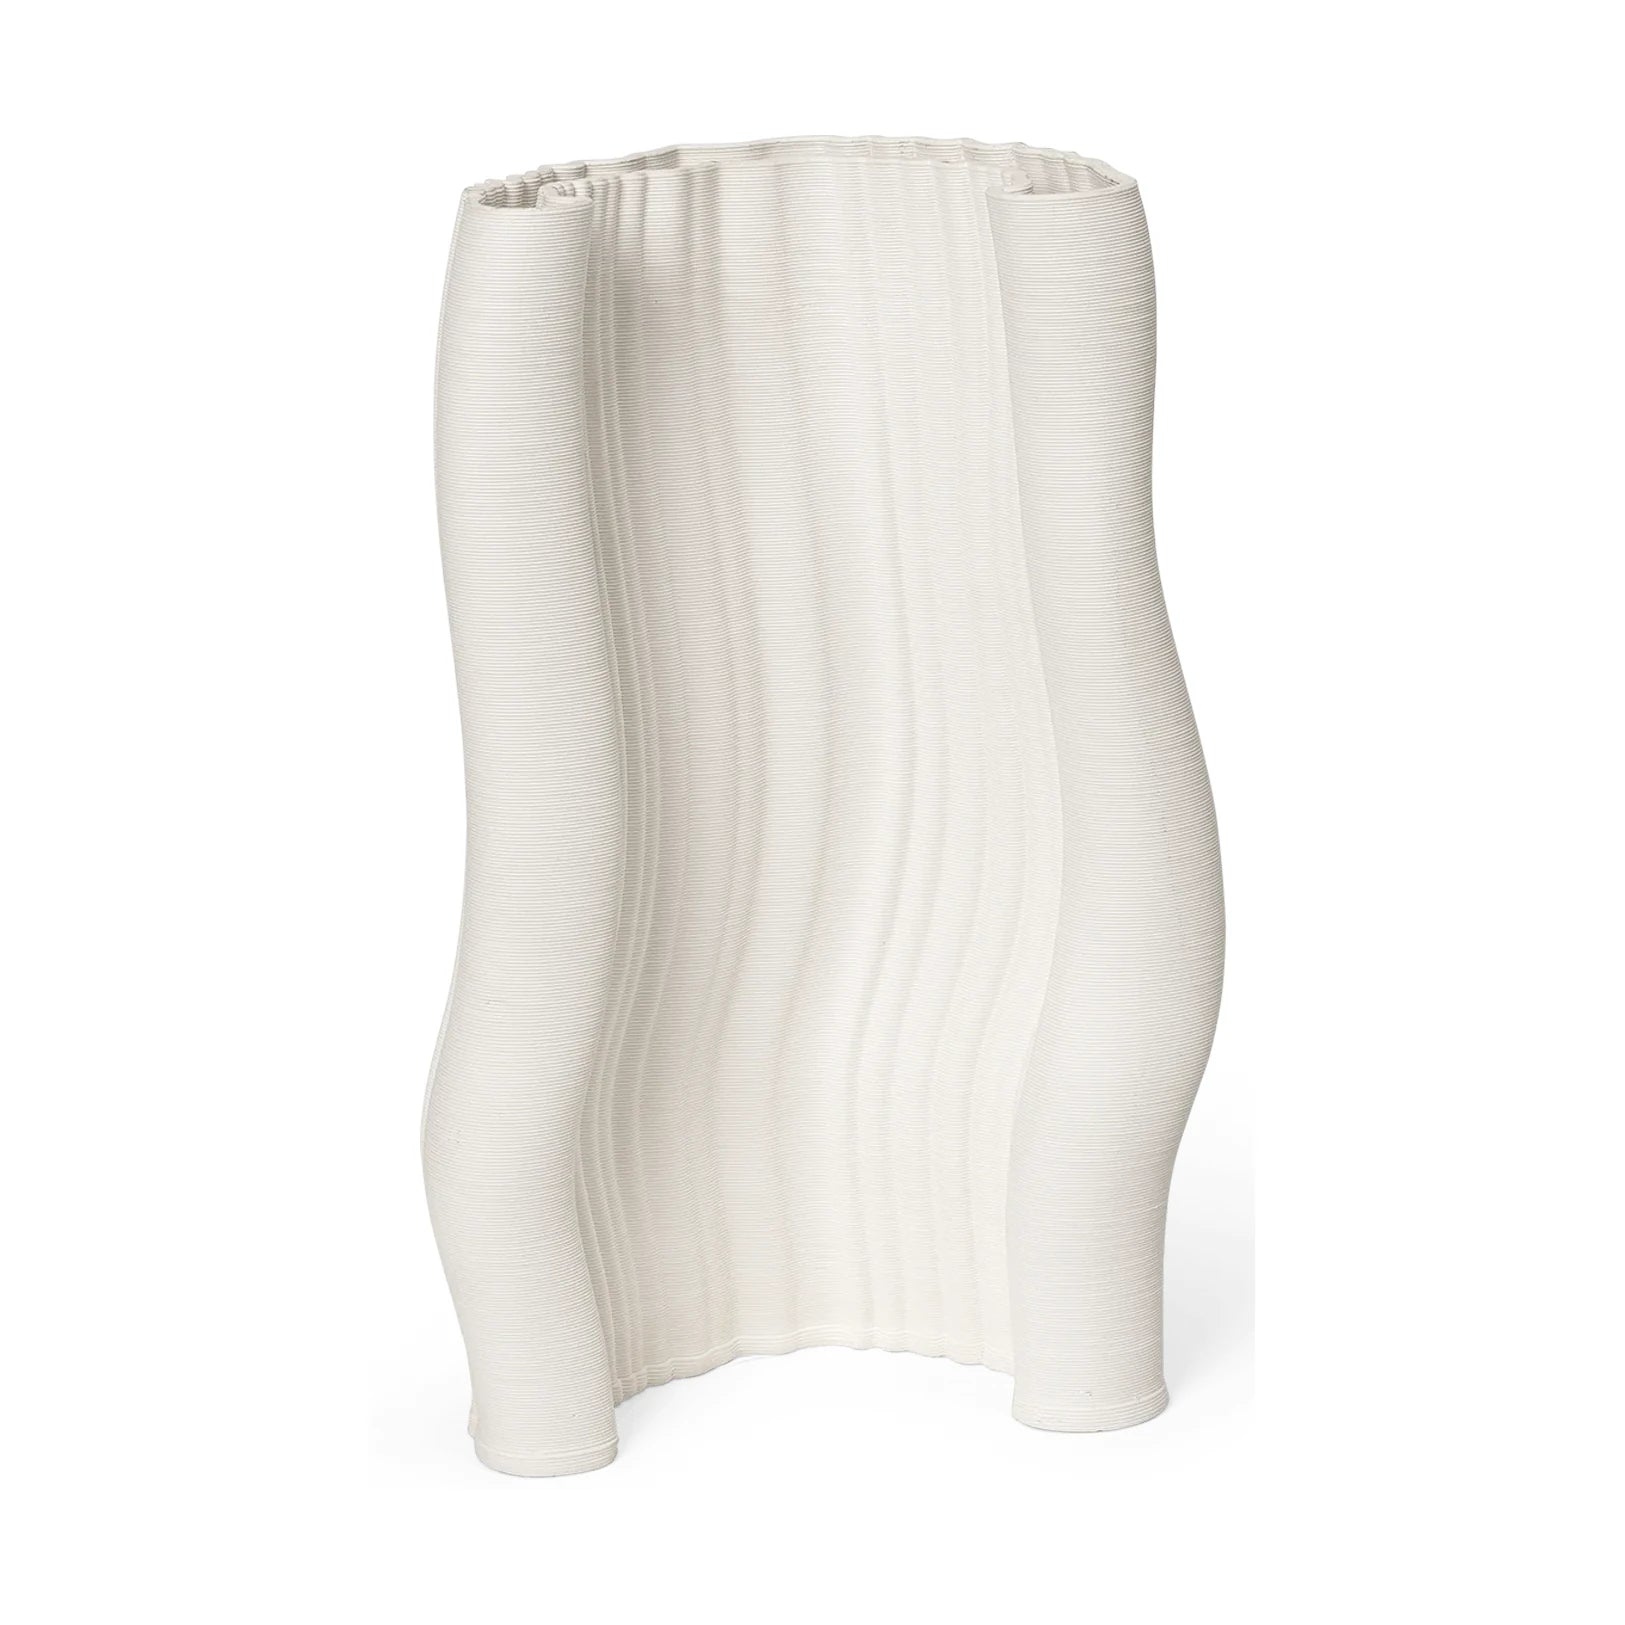 Moire Vase | Off-White | 3D Printed Clay | by ferm Living - Lifestory